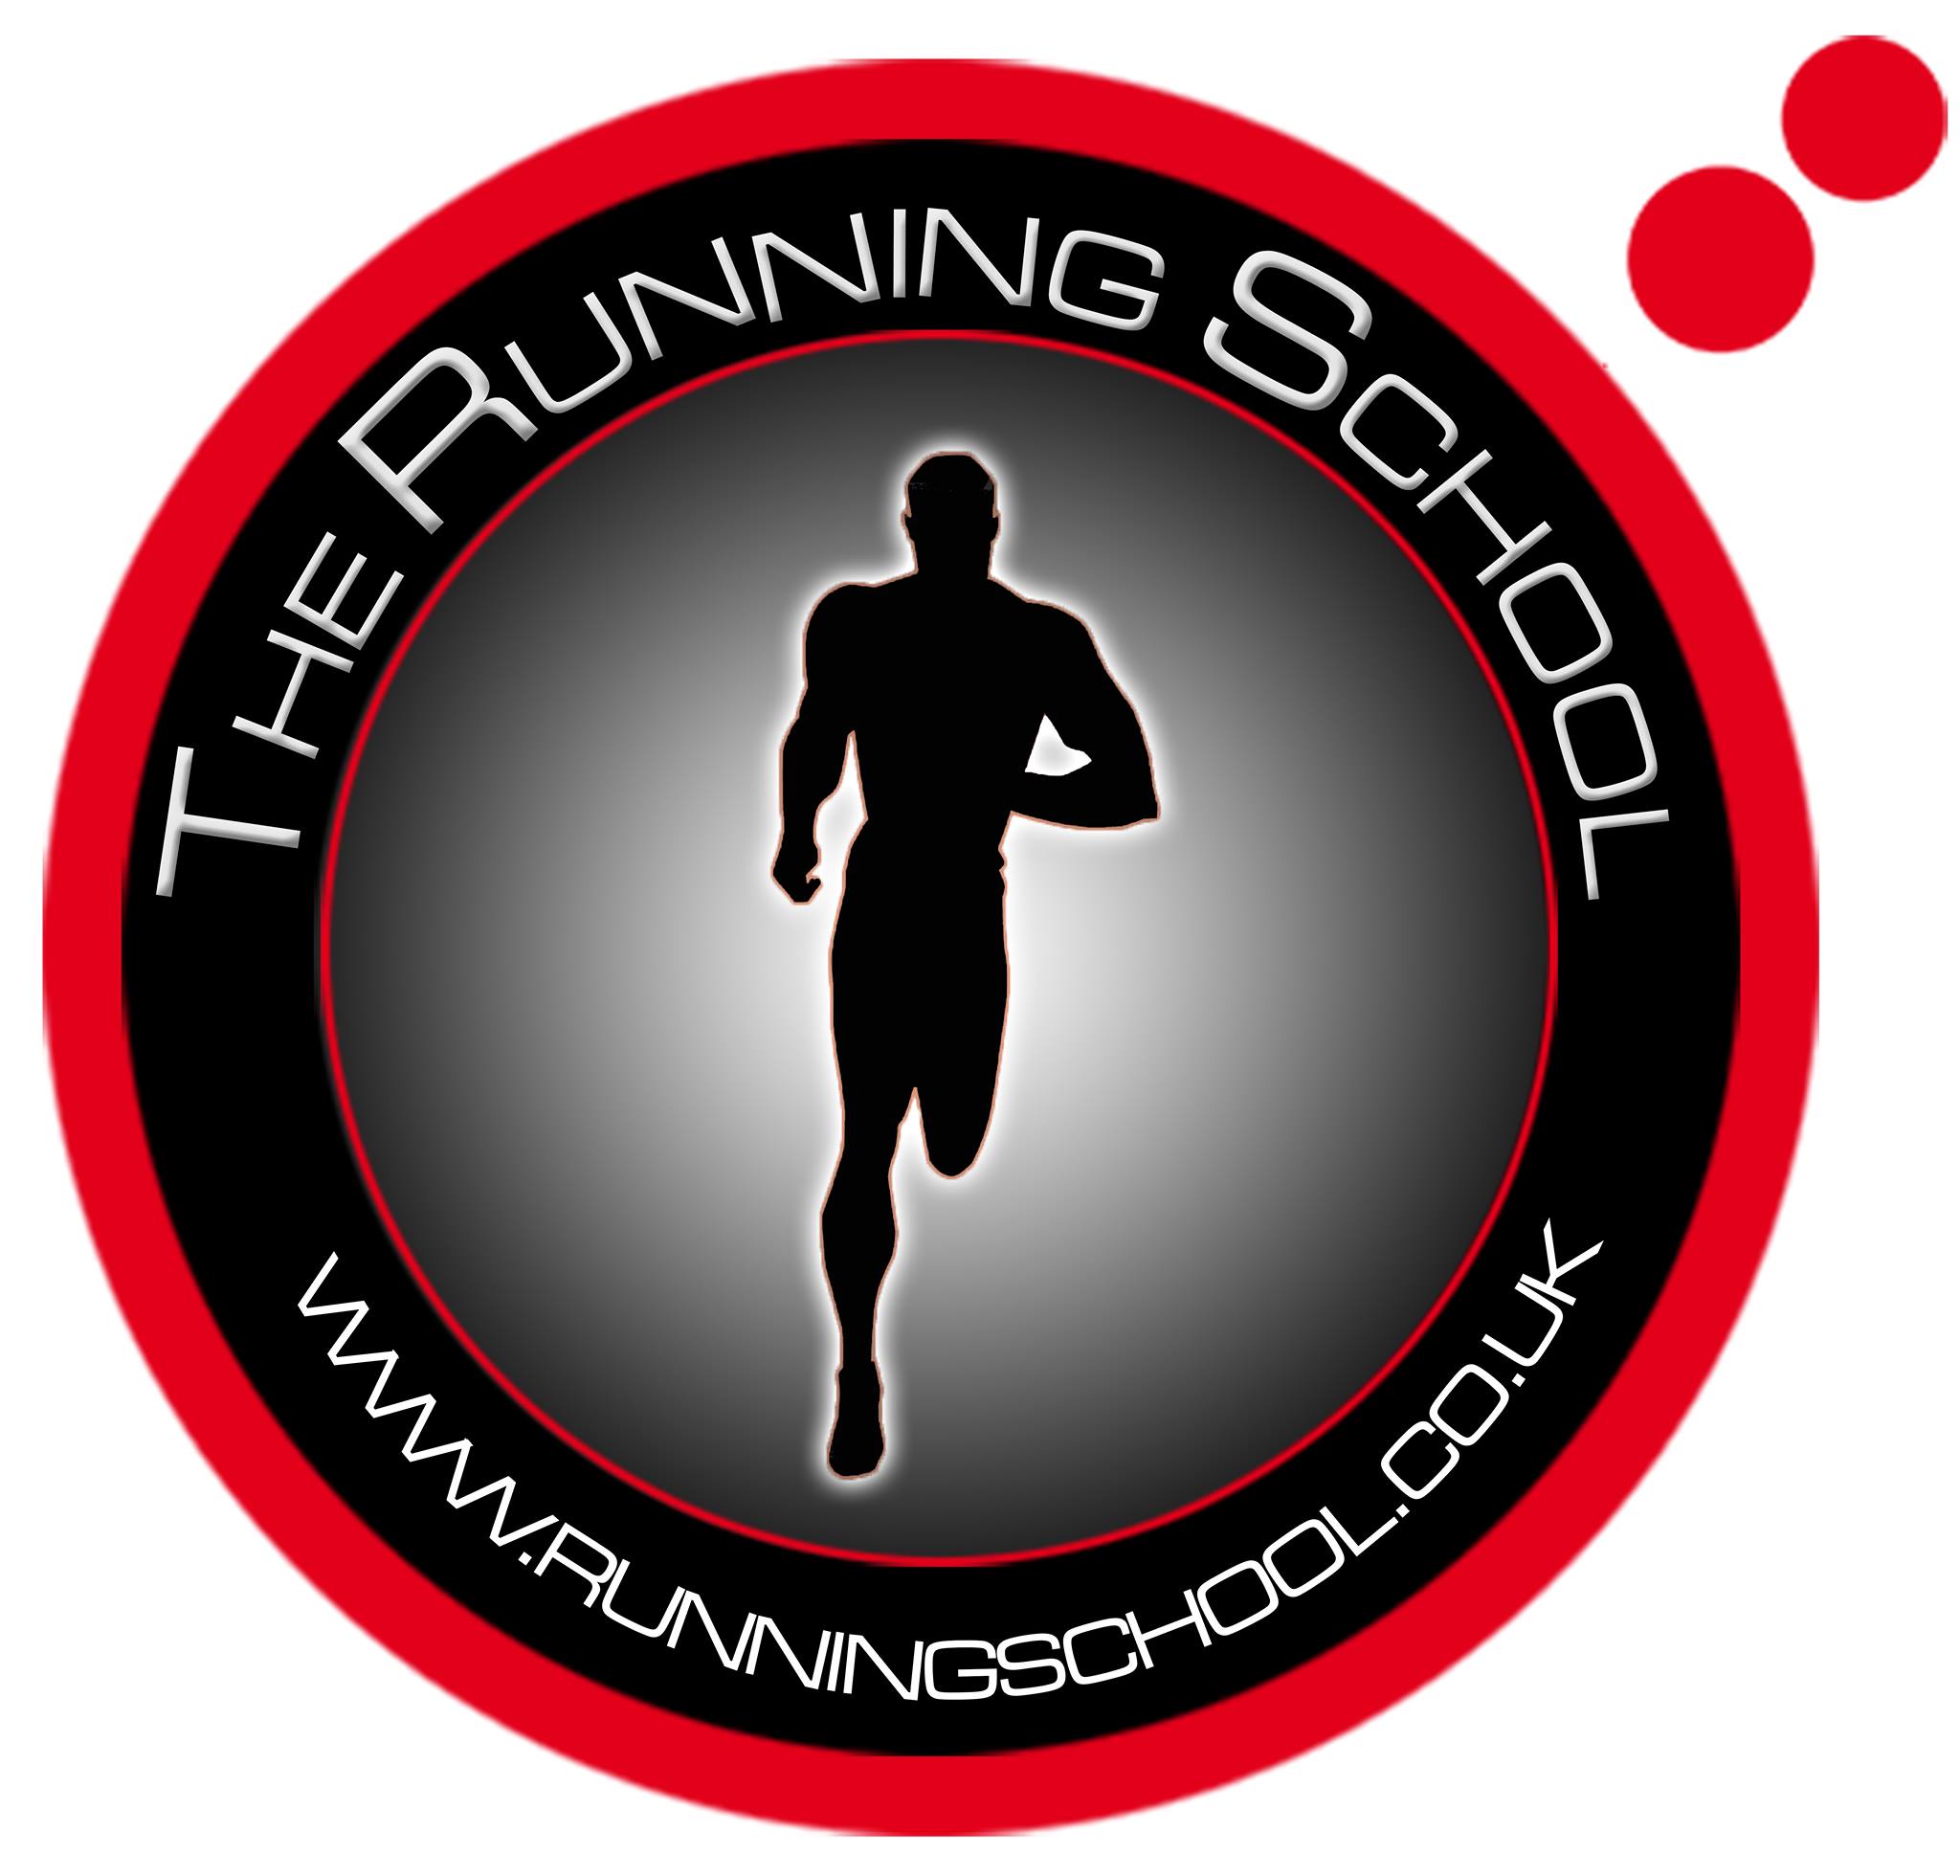 Logo of The Running School Fitness Consultants In London